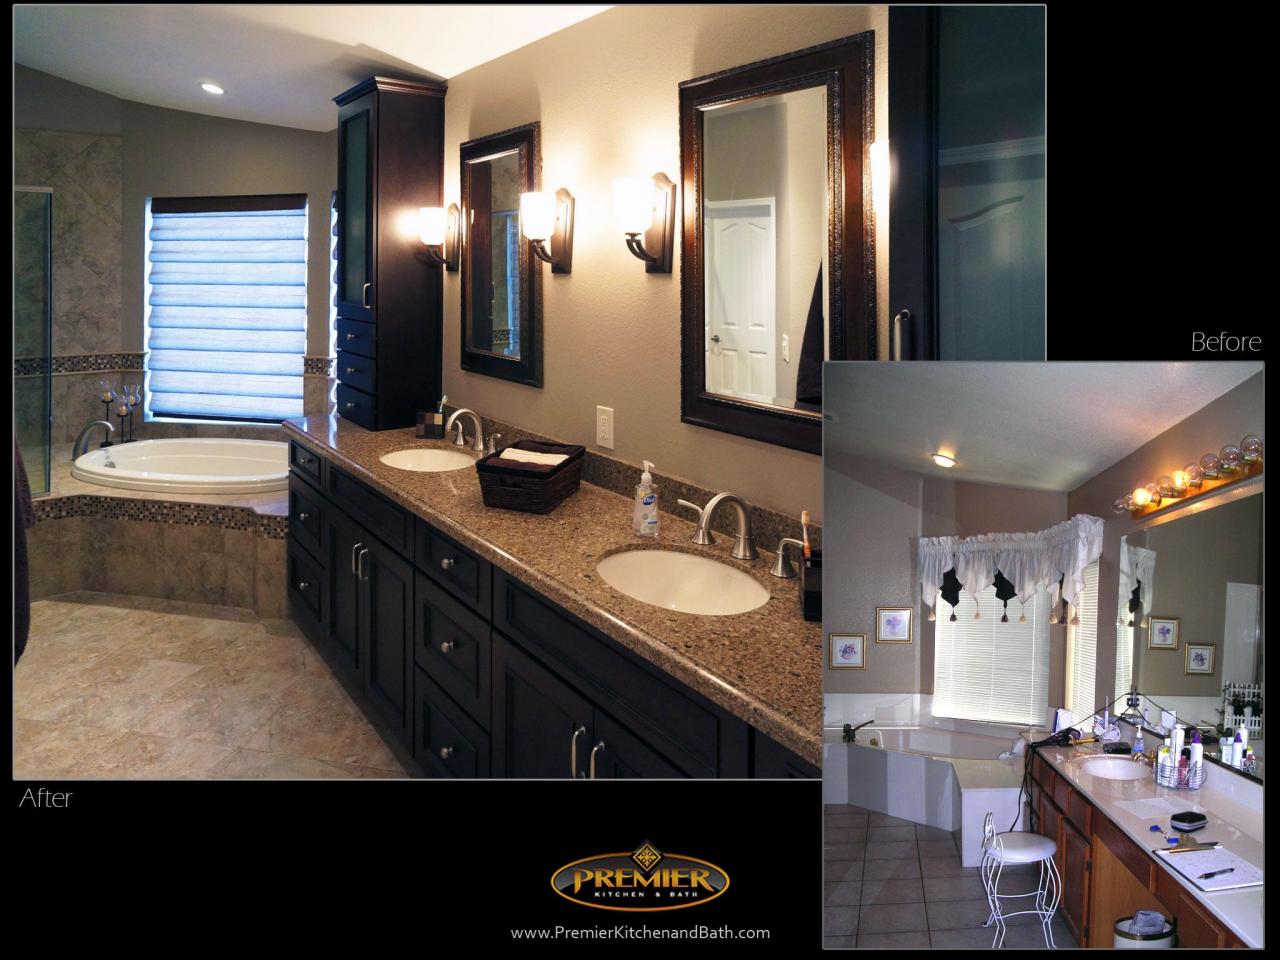 Before & After Premier Kitchen and Bath. Quality remodeling